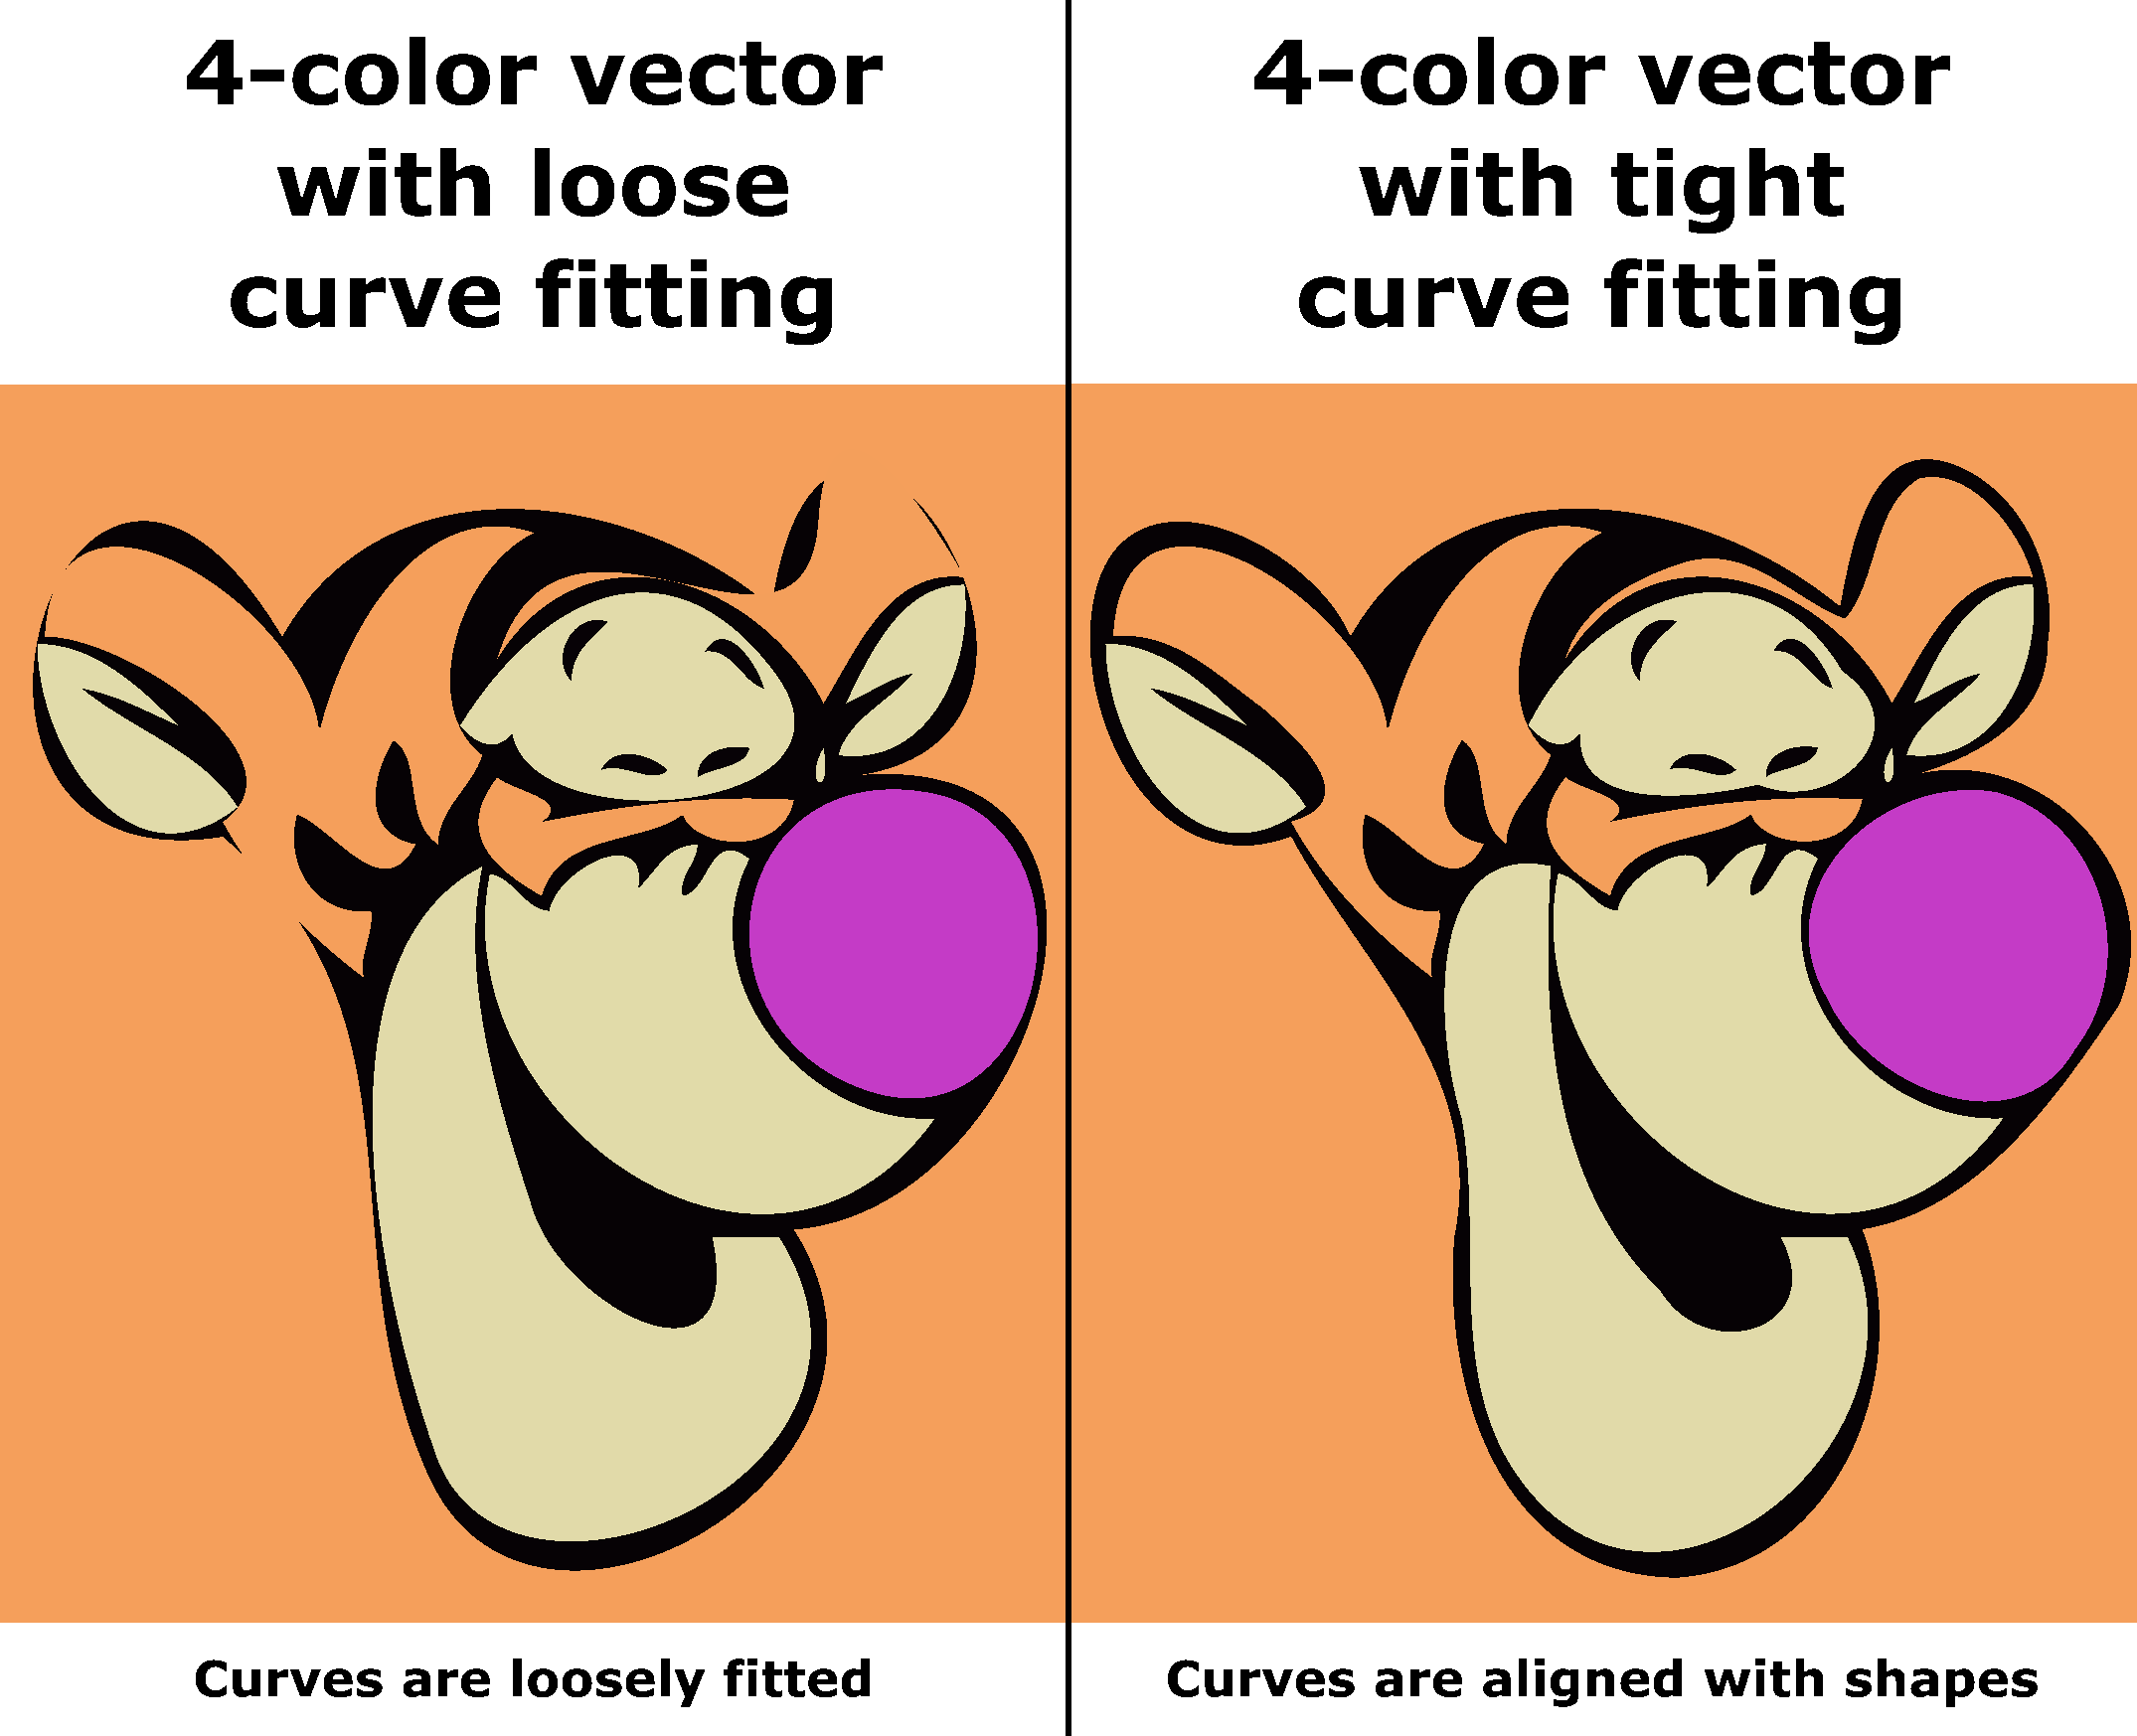 Fit loose and tight curves to png to svg, png to eps, png to ai, jpg to svg, jpeg to svg, jpeg eps, jpg to eps, jpg to ai, jpeg to eps, jpeg to ai